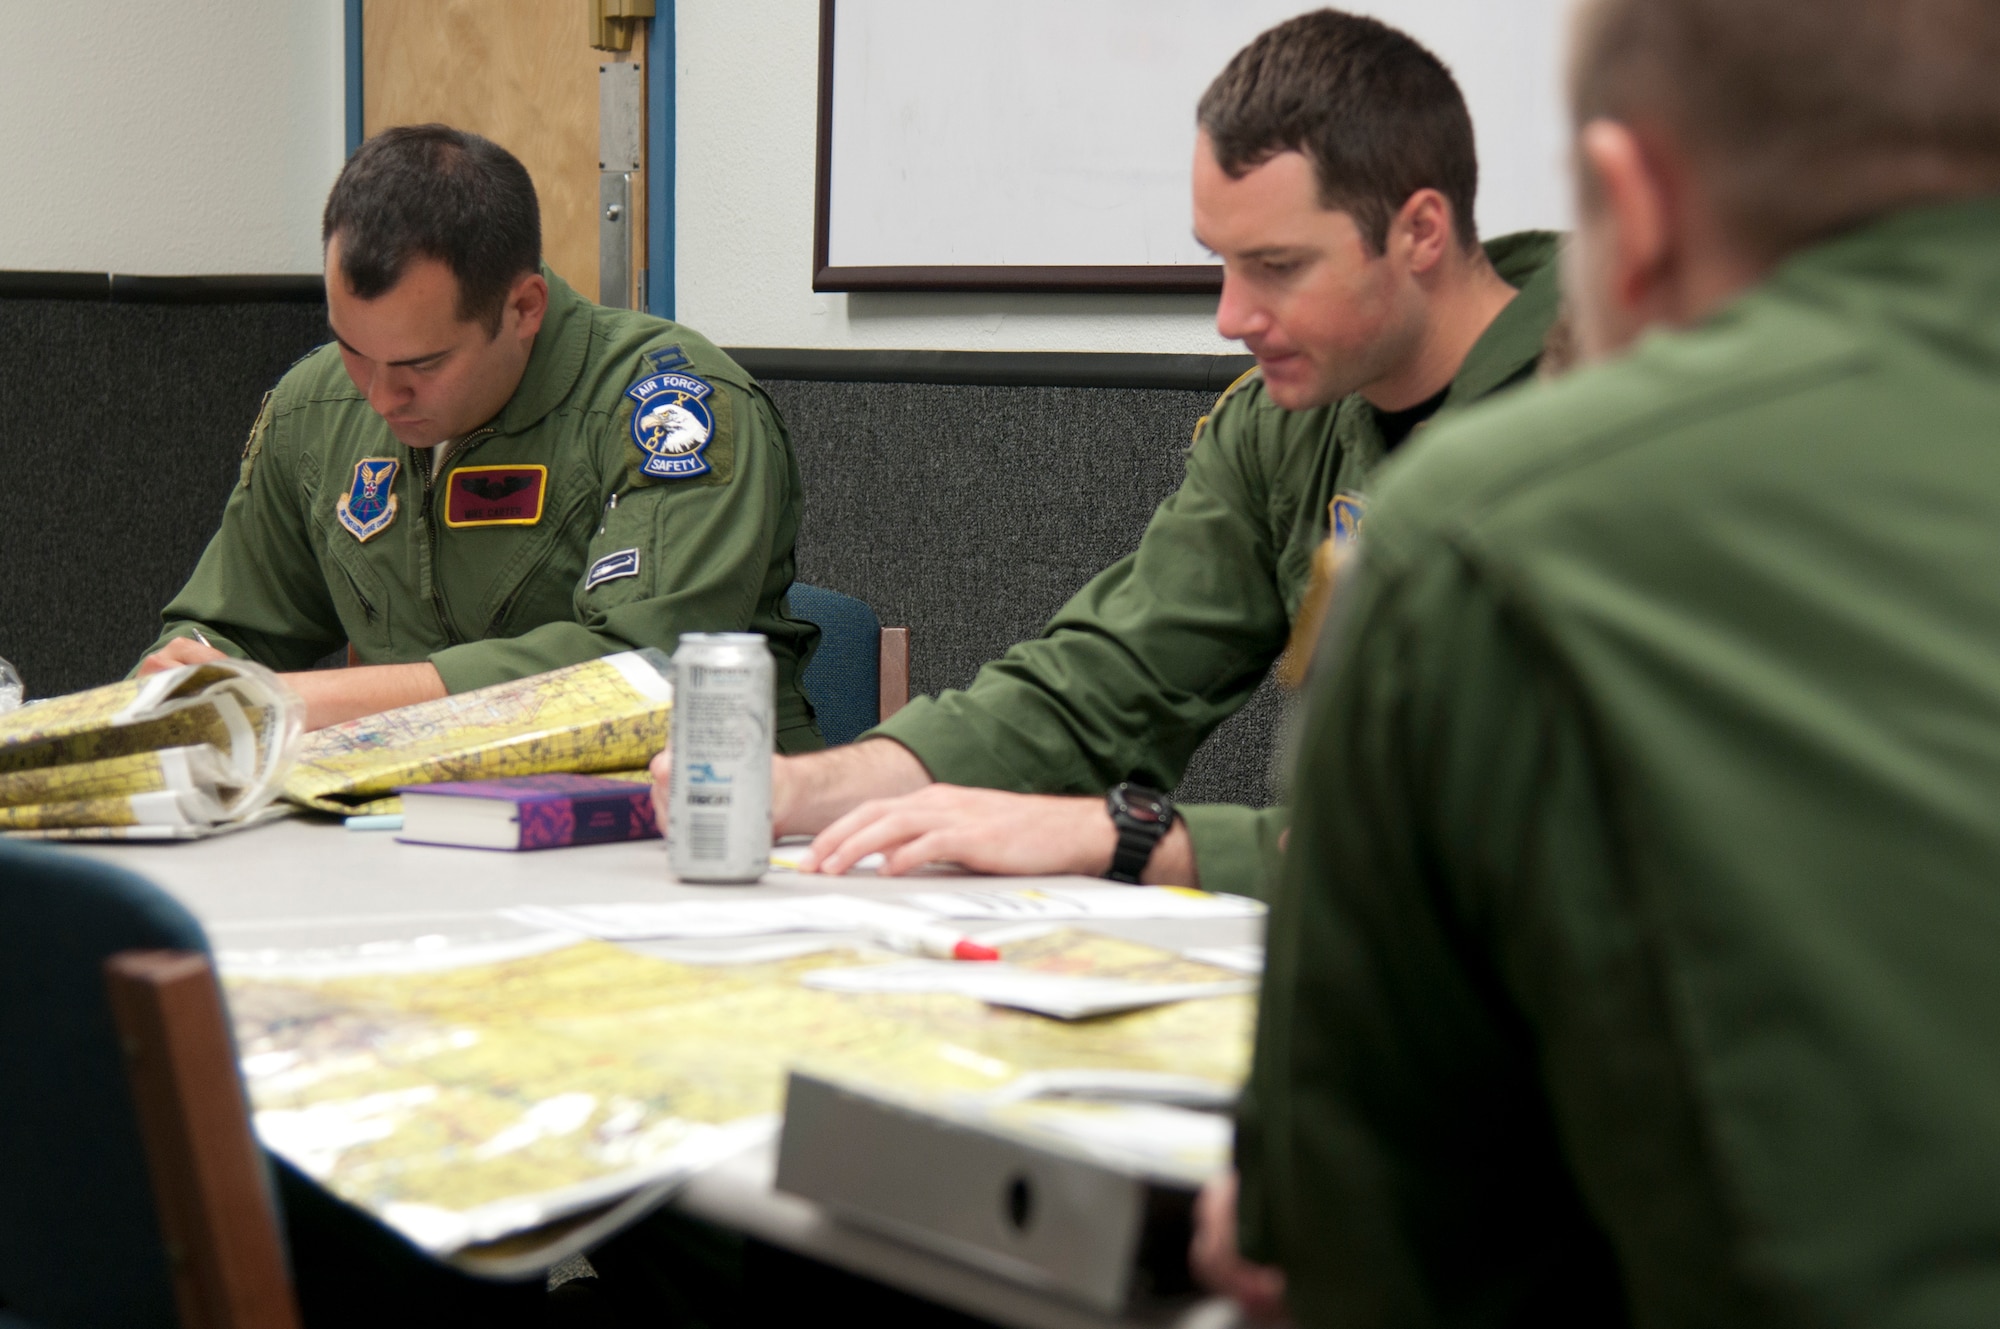 Capt. Michael Carter, 582nd Helicopter Group flight safety officer, fills out his Operational Risk Management forms prior to his flight. The ORM is a mandatory form that ensures the crew is prepared for a flight by having the crew conduct self-checks of their ability to perform the flight. (U.S. Air Force photo by Airman 1st Class Malcolm Mayfield)